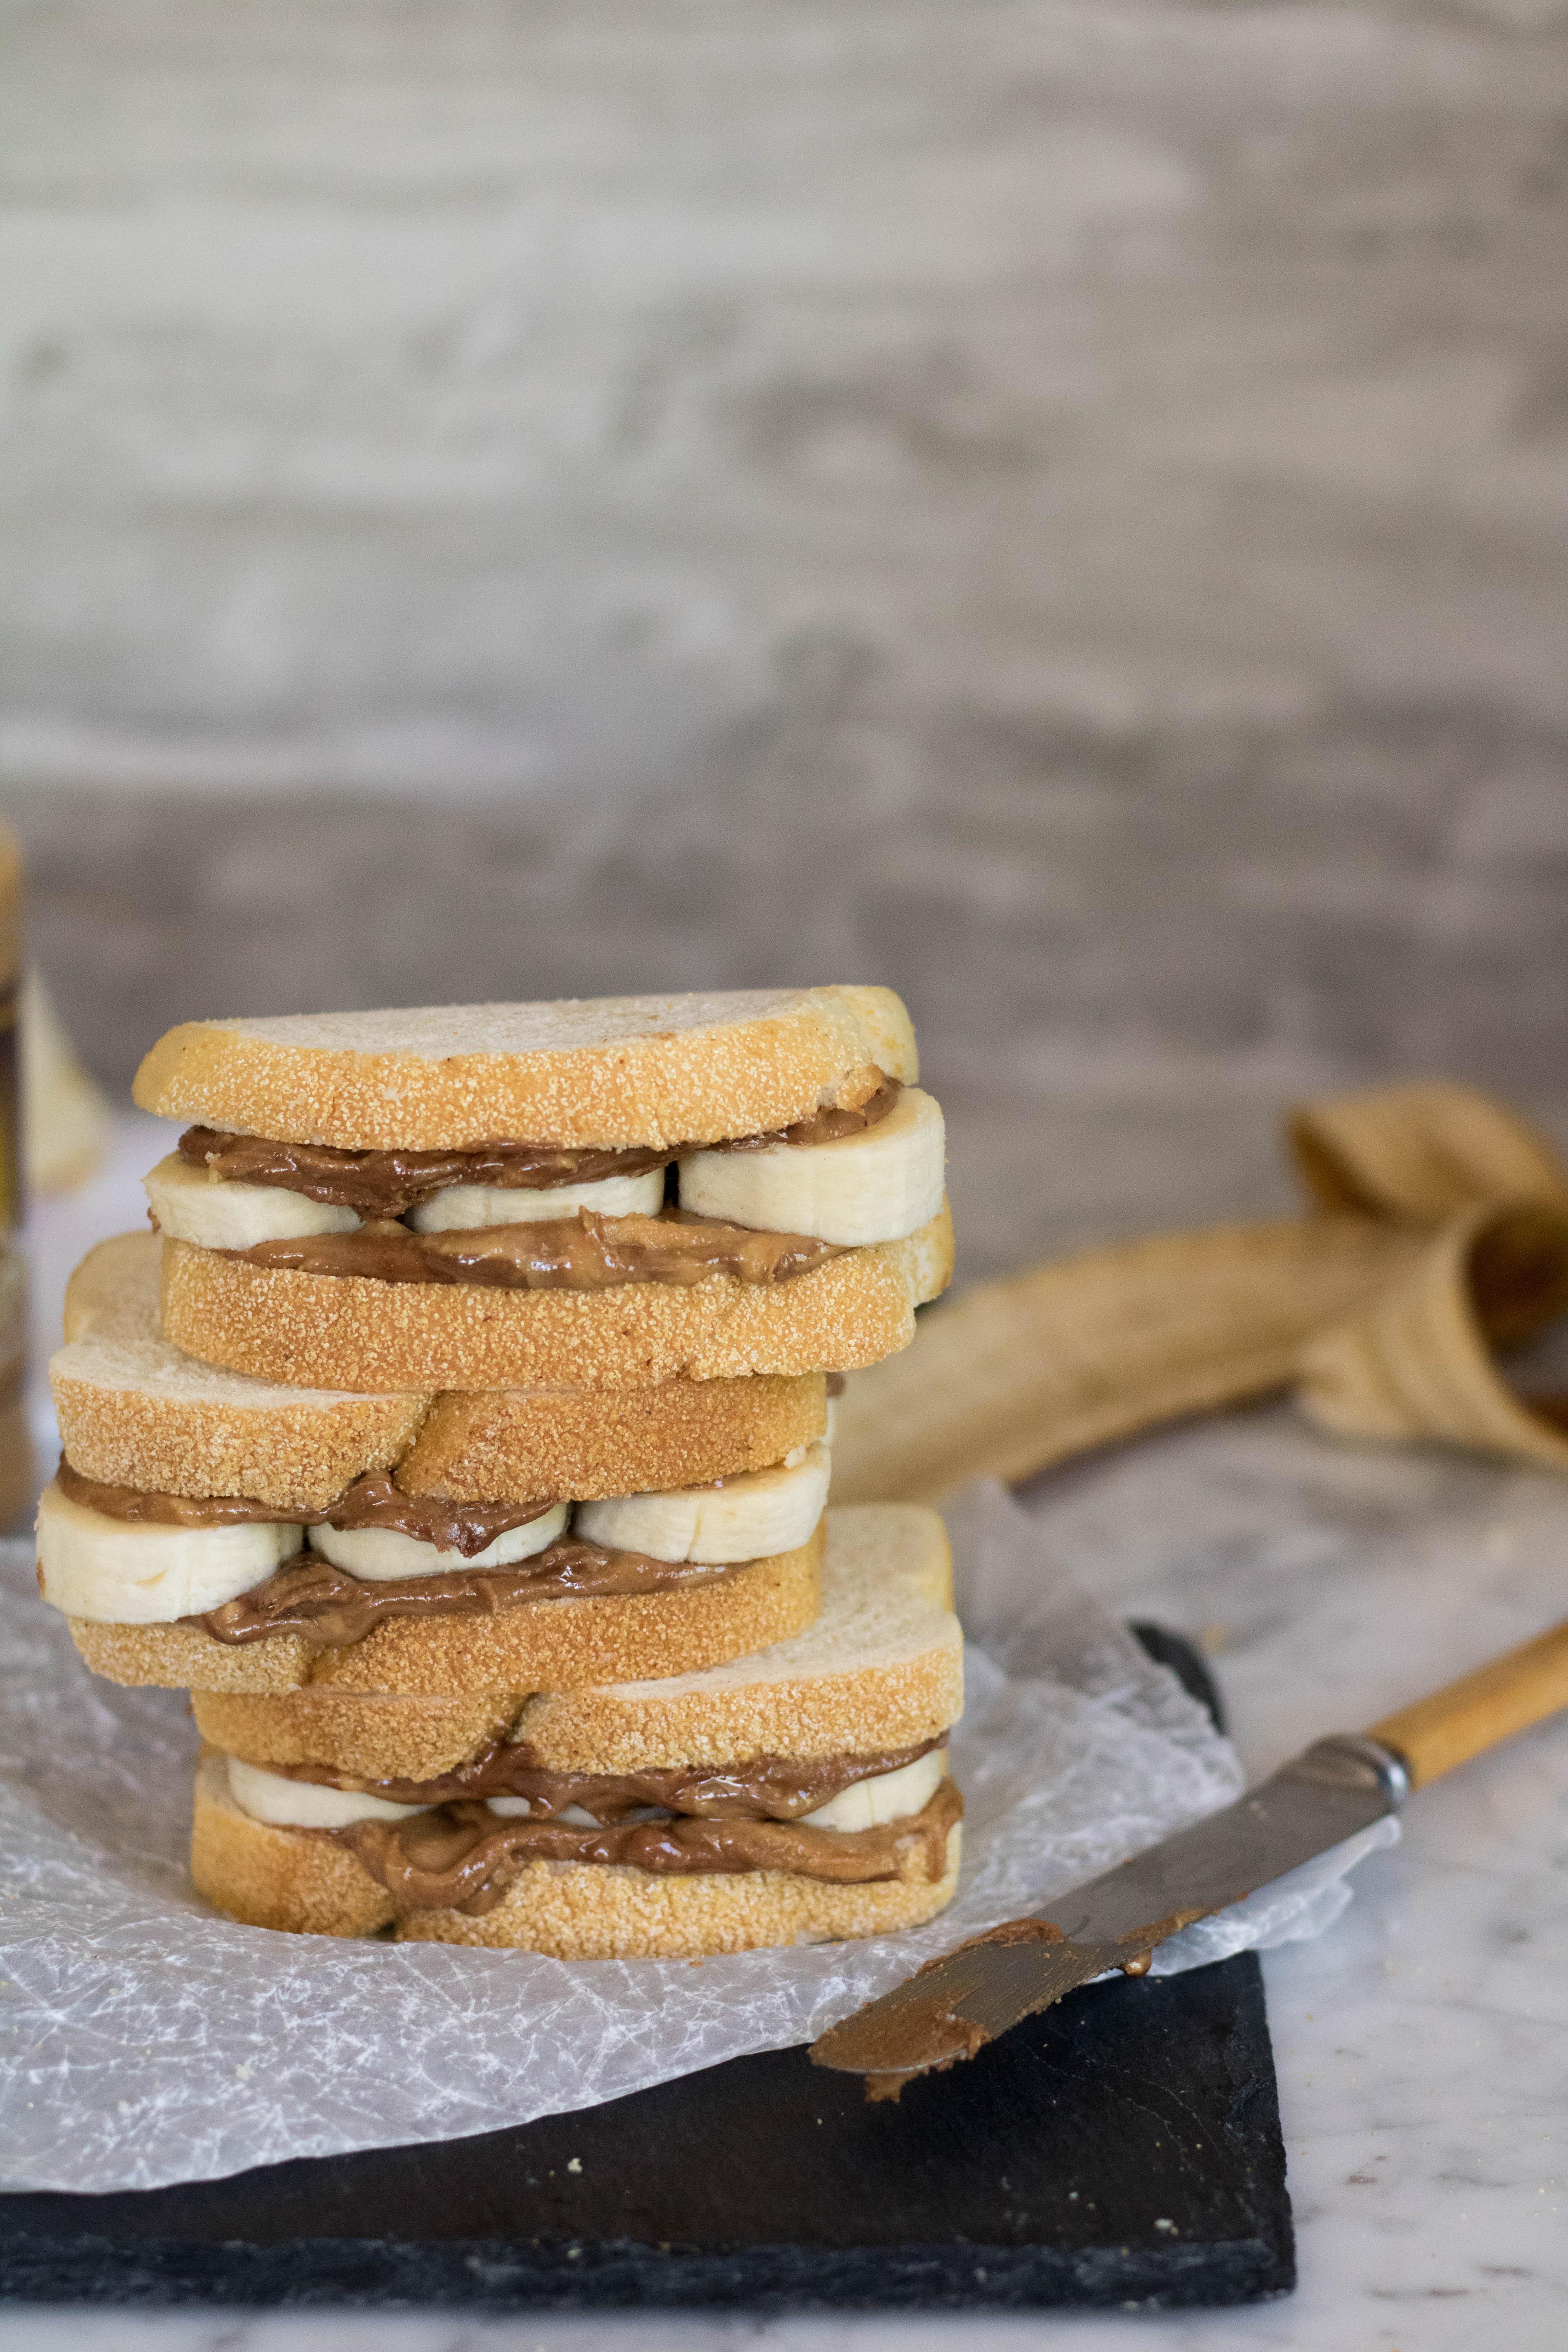 Grilled Peanut Butter Banana Sandwich - Lifestyle of a Foodie